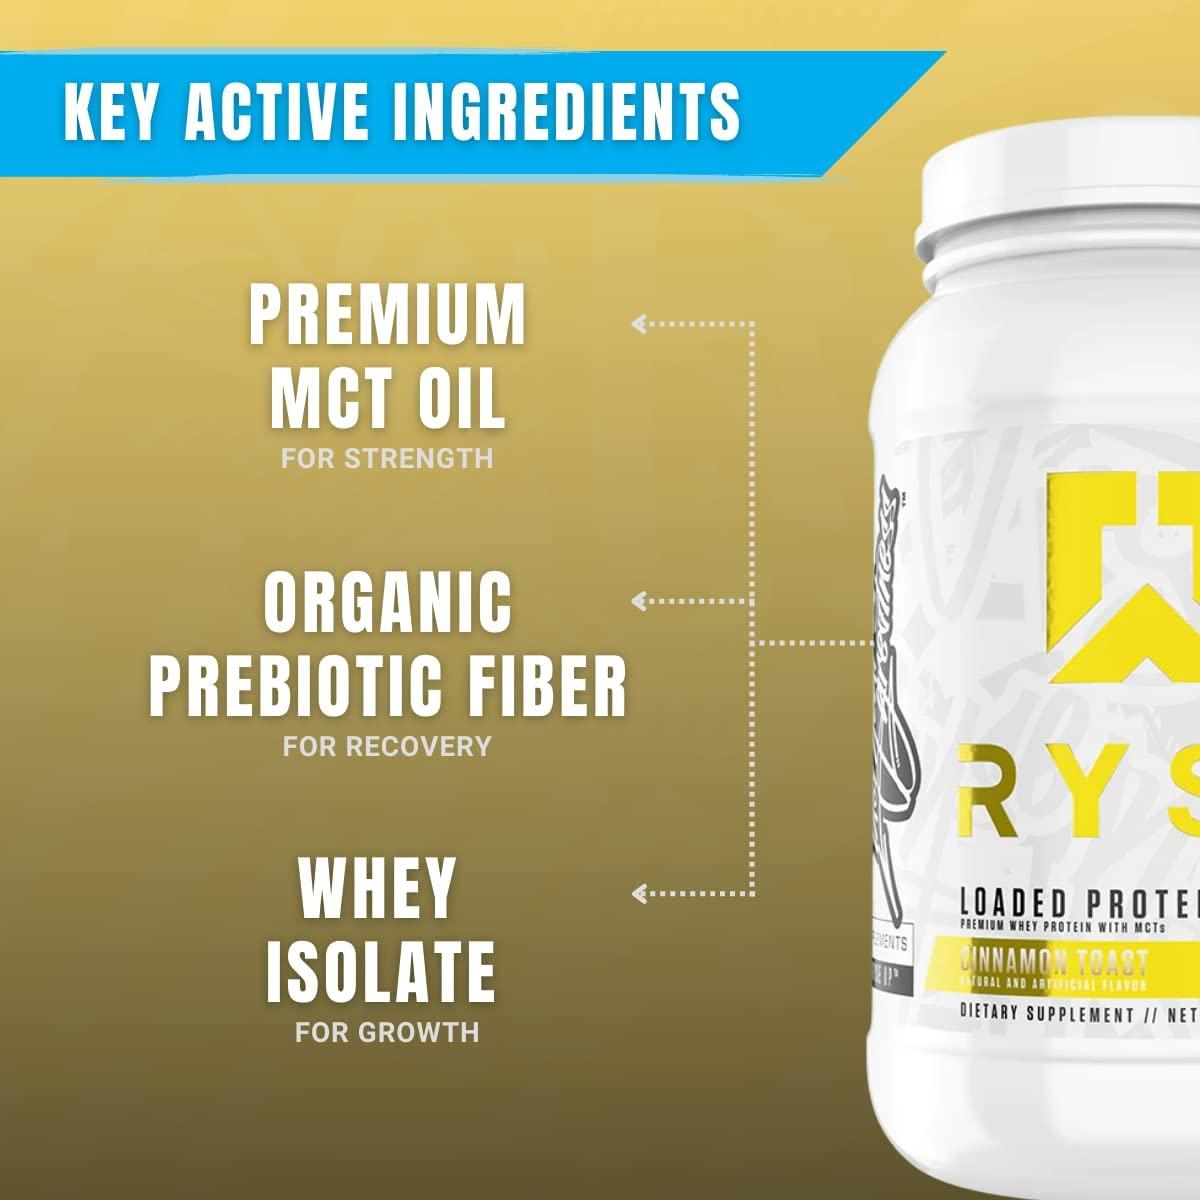 Ryse Loaded Protein Powder | 25g Whey Protein Isolate & Concentrate | with  Prebiotic Fiber & MCTs | Low Carbs & Low Sugar | 27 Servings (Fruity